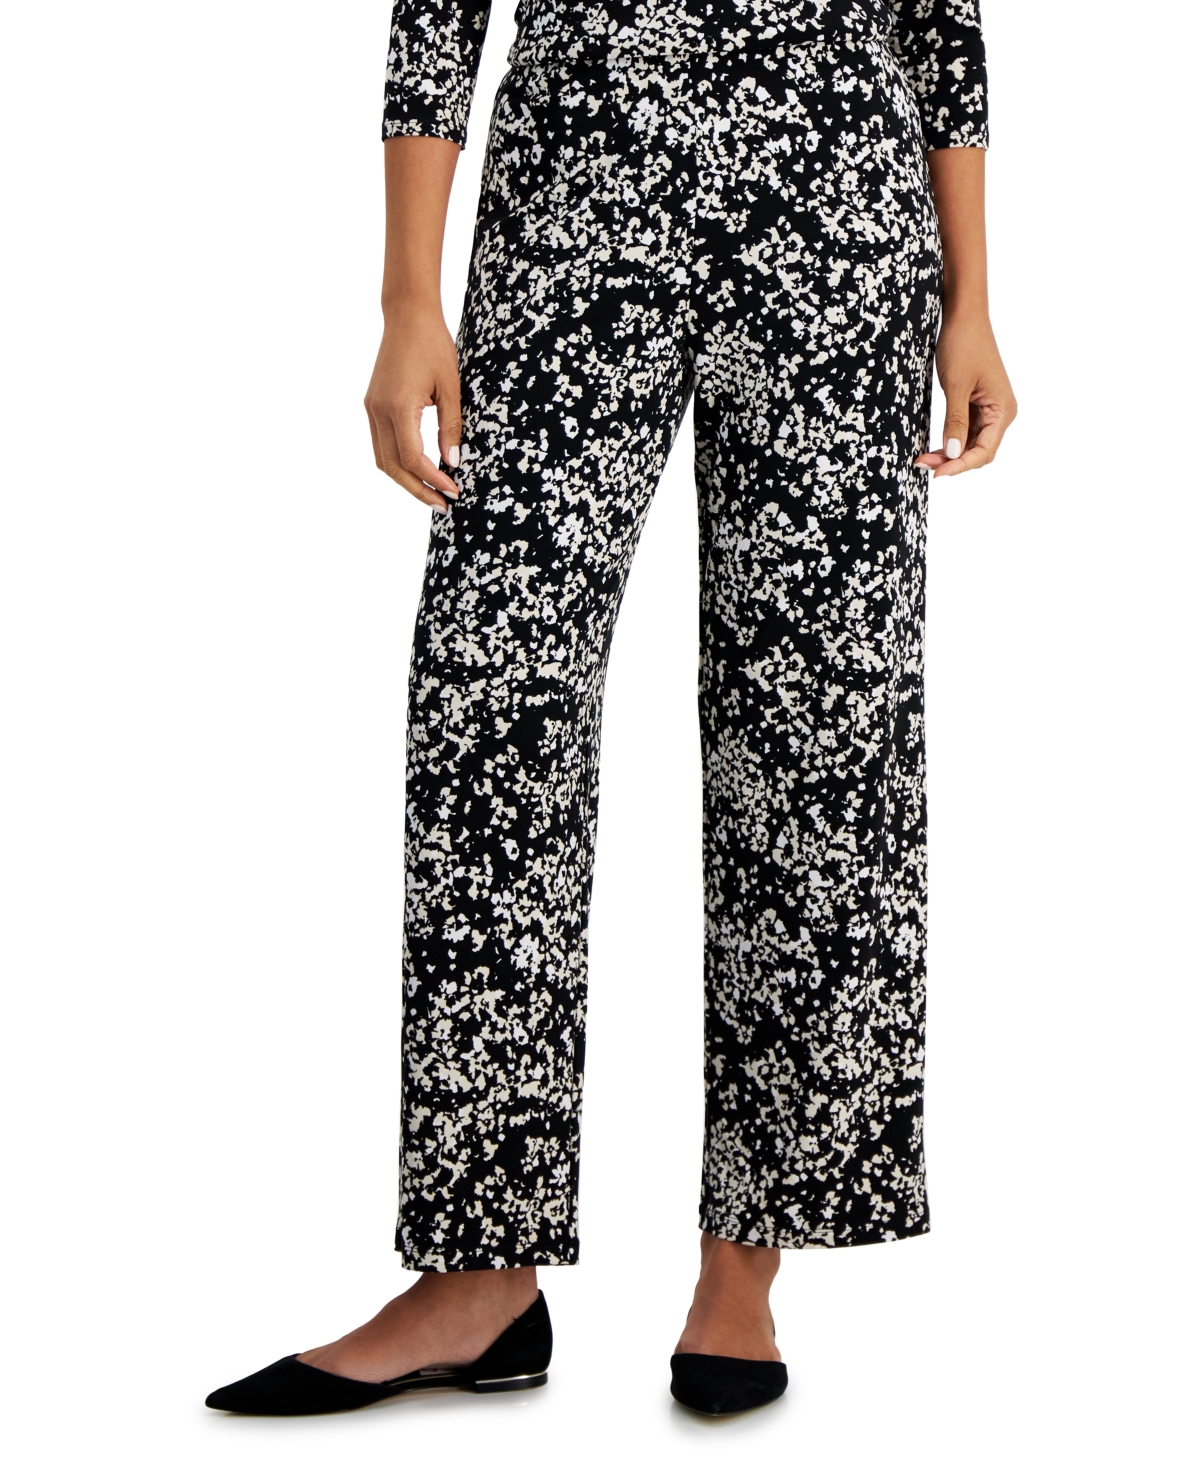 Women's Knit Dressing Printed Pull-On Pants, Created for Macy's - Modern Blue Combo